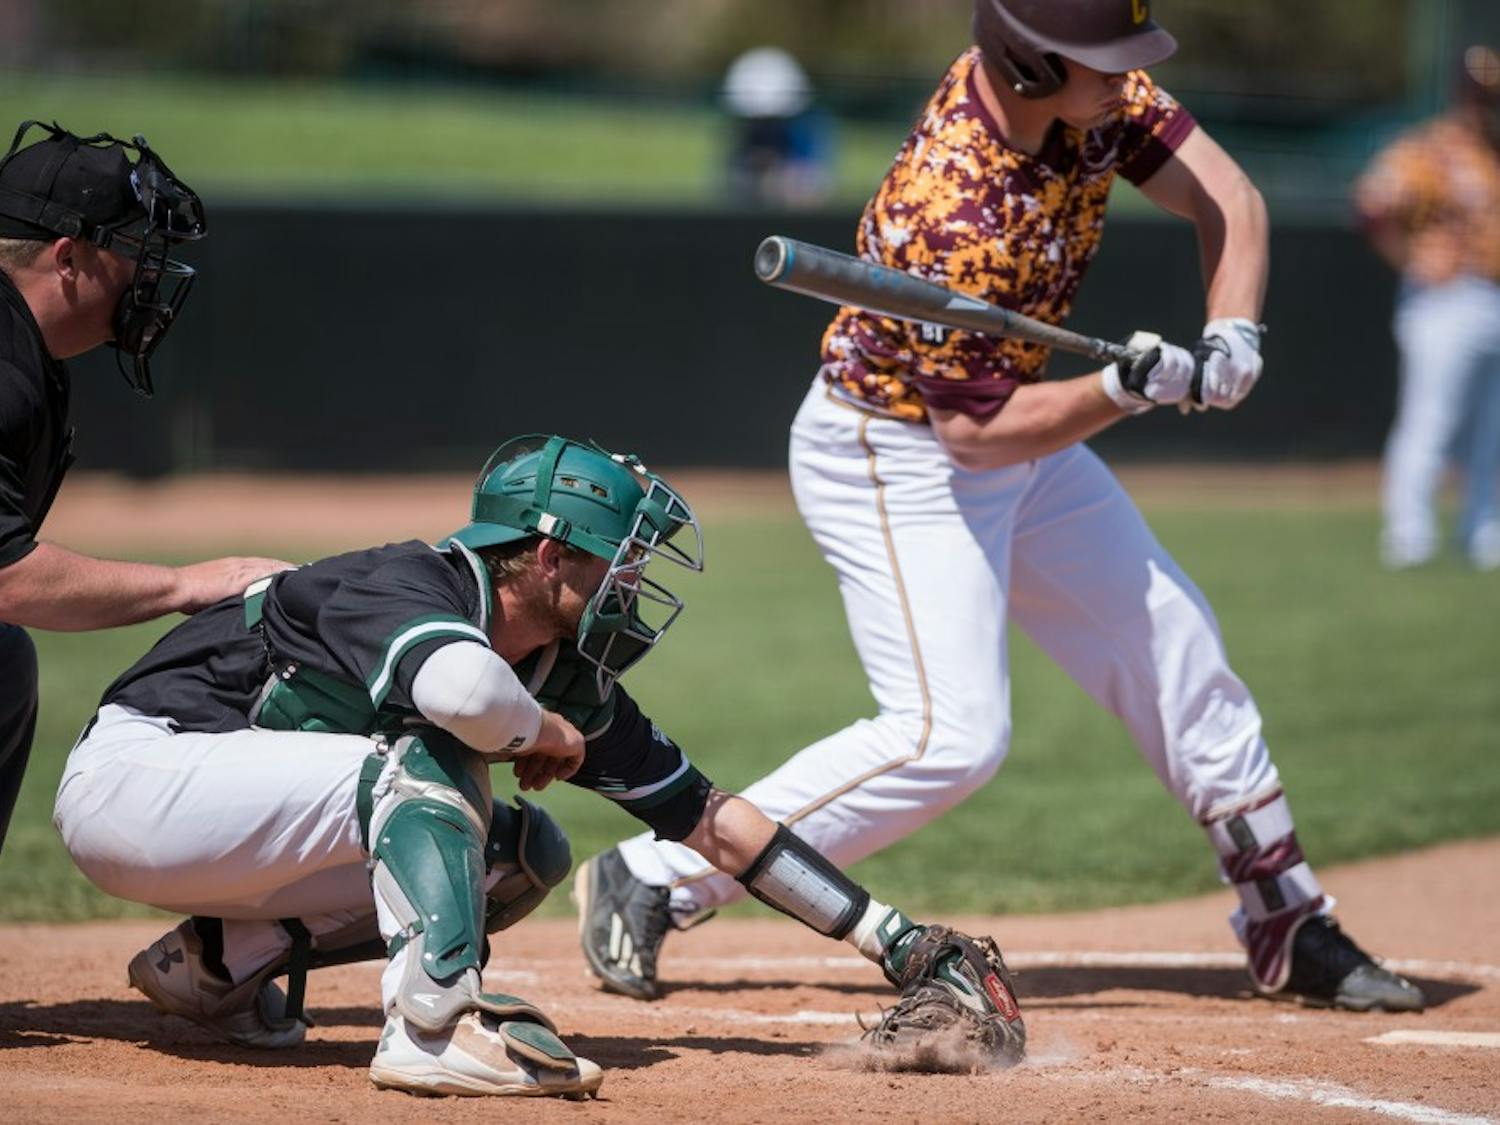 Ohio catcher Nick Bredeson stops the ball on the ground during the Bobcats’ game against Central Michigan on April 9.